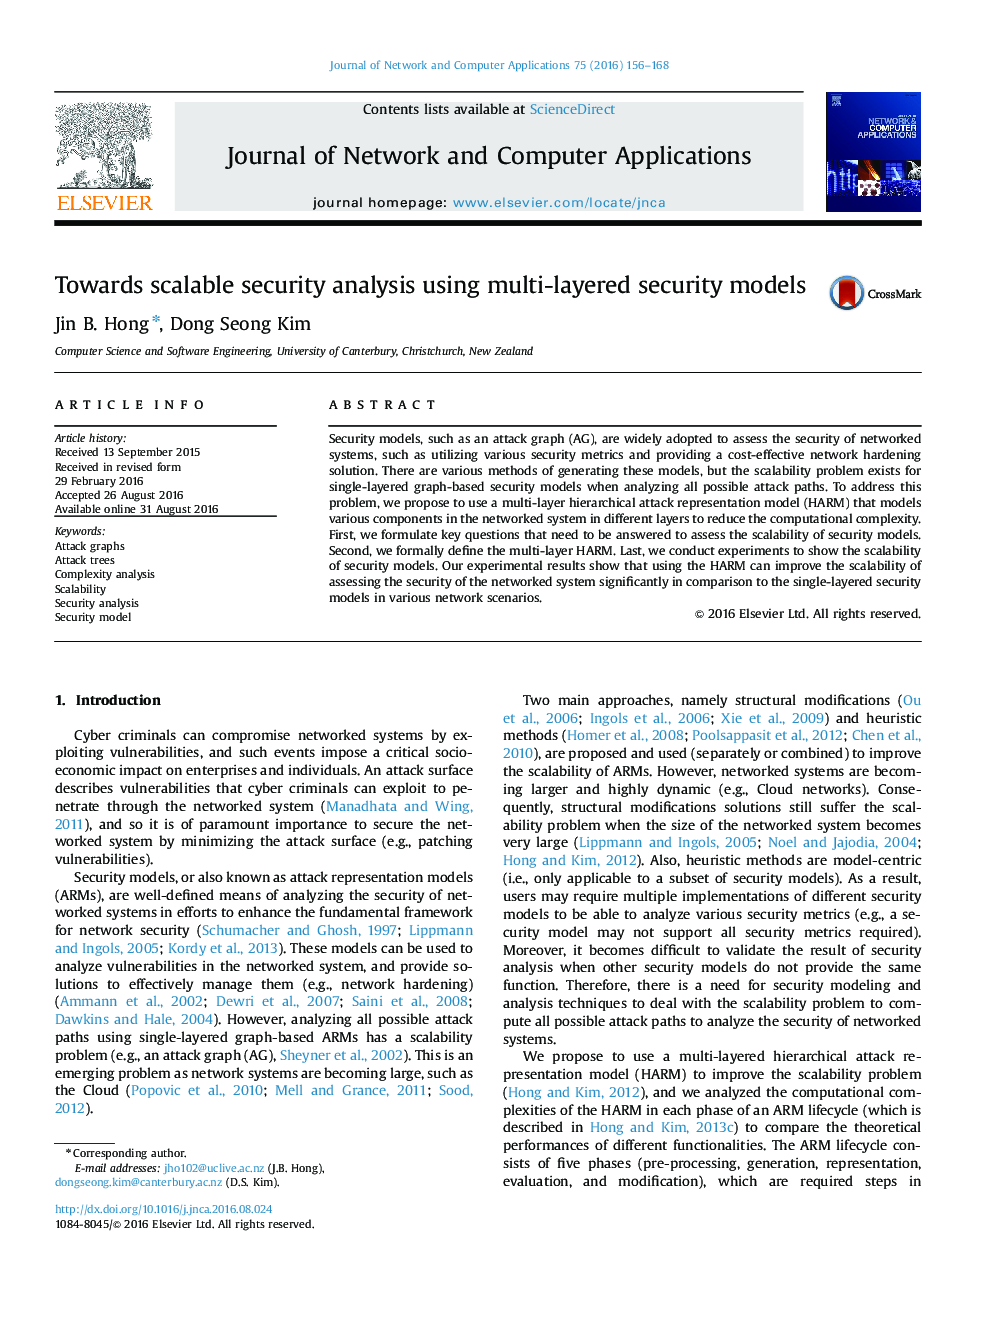 Towards scalable security analysis using multi-layered security models